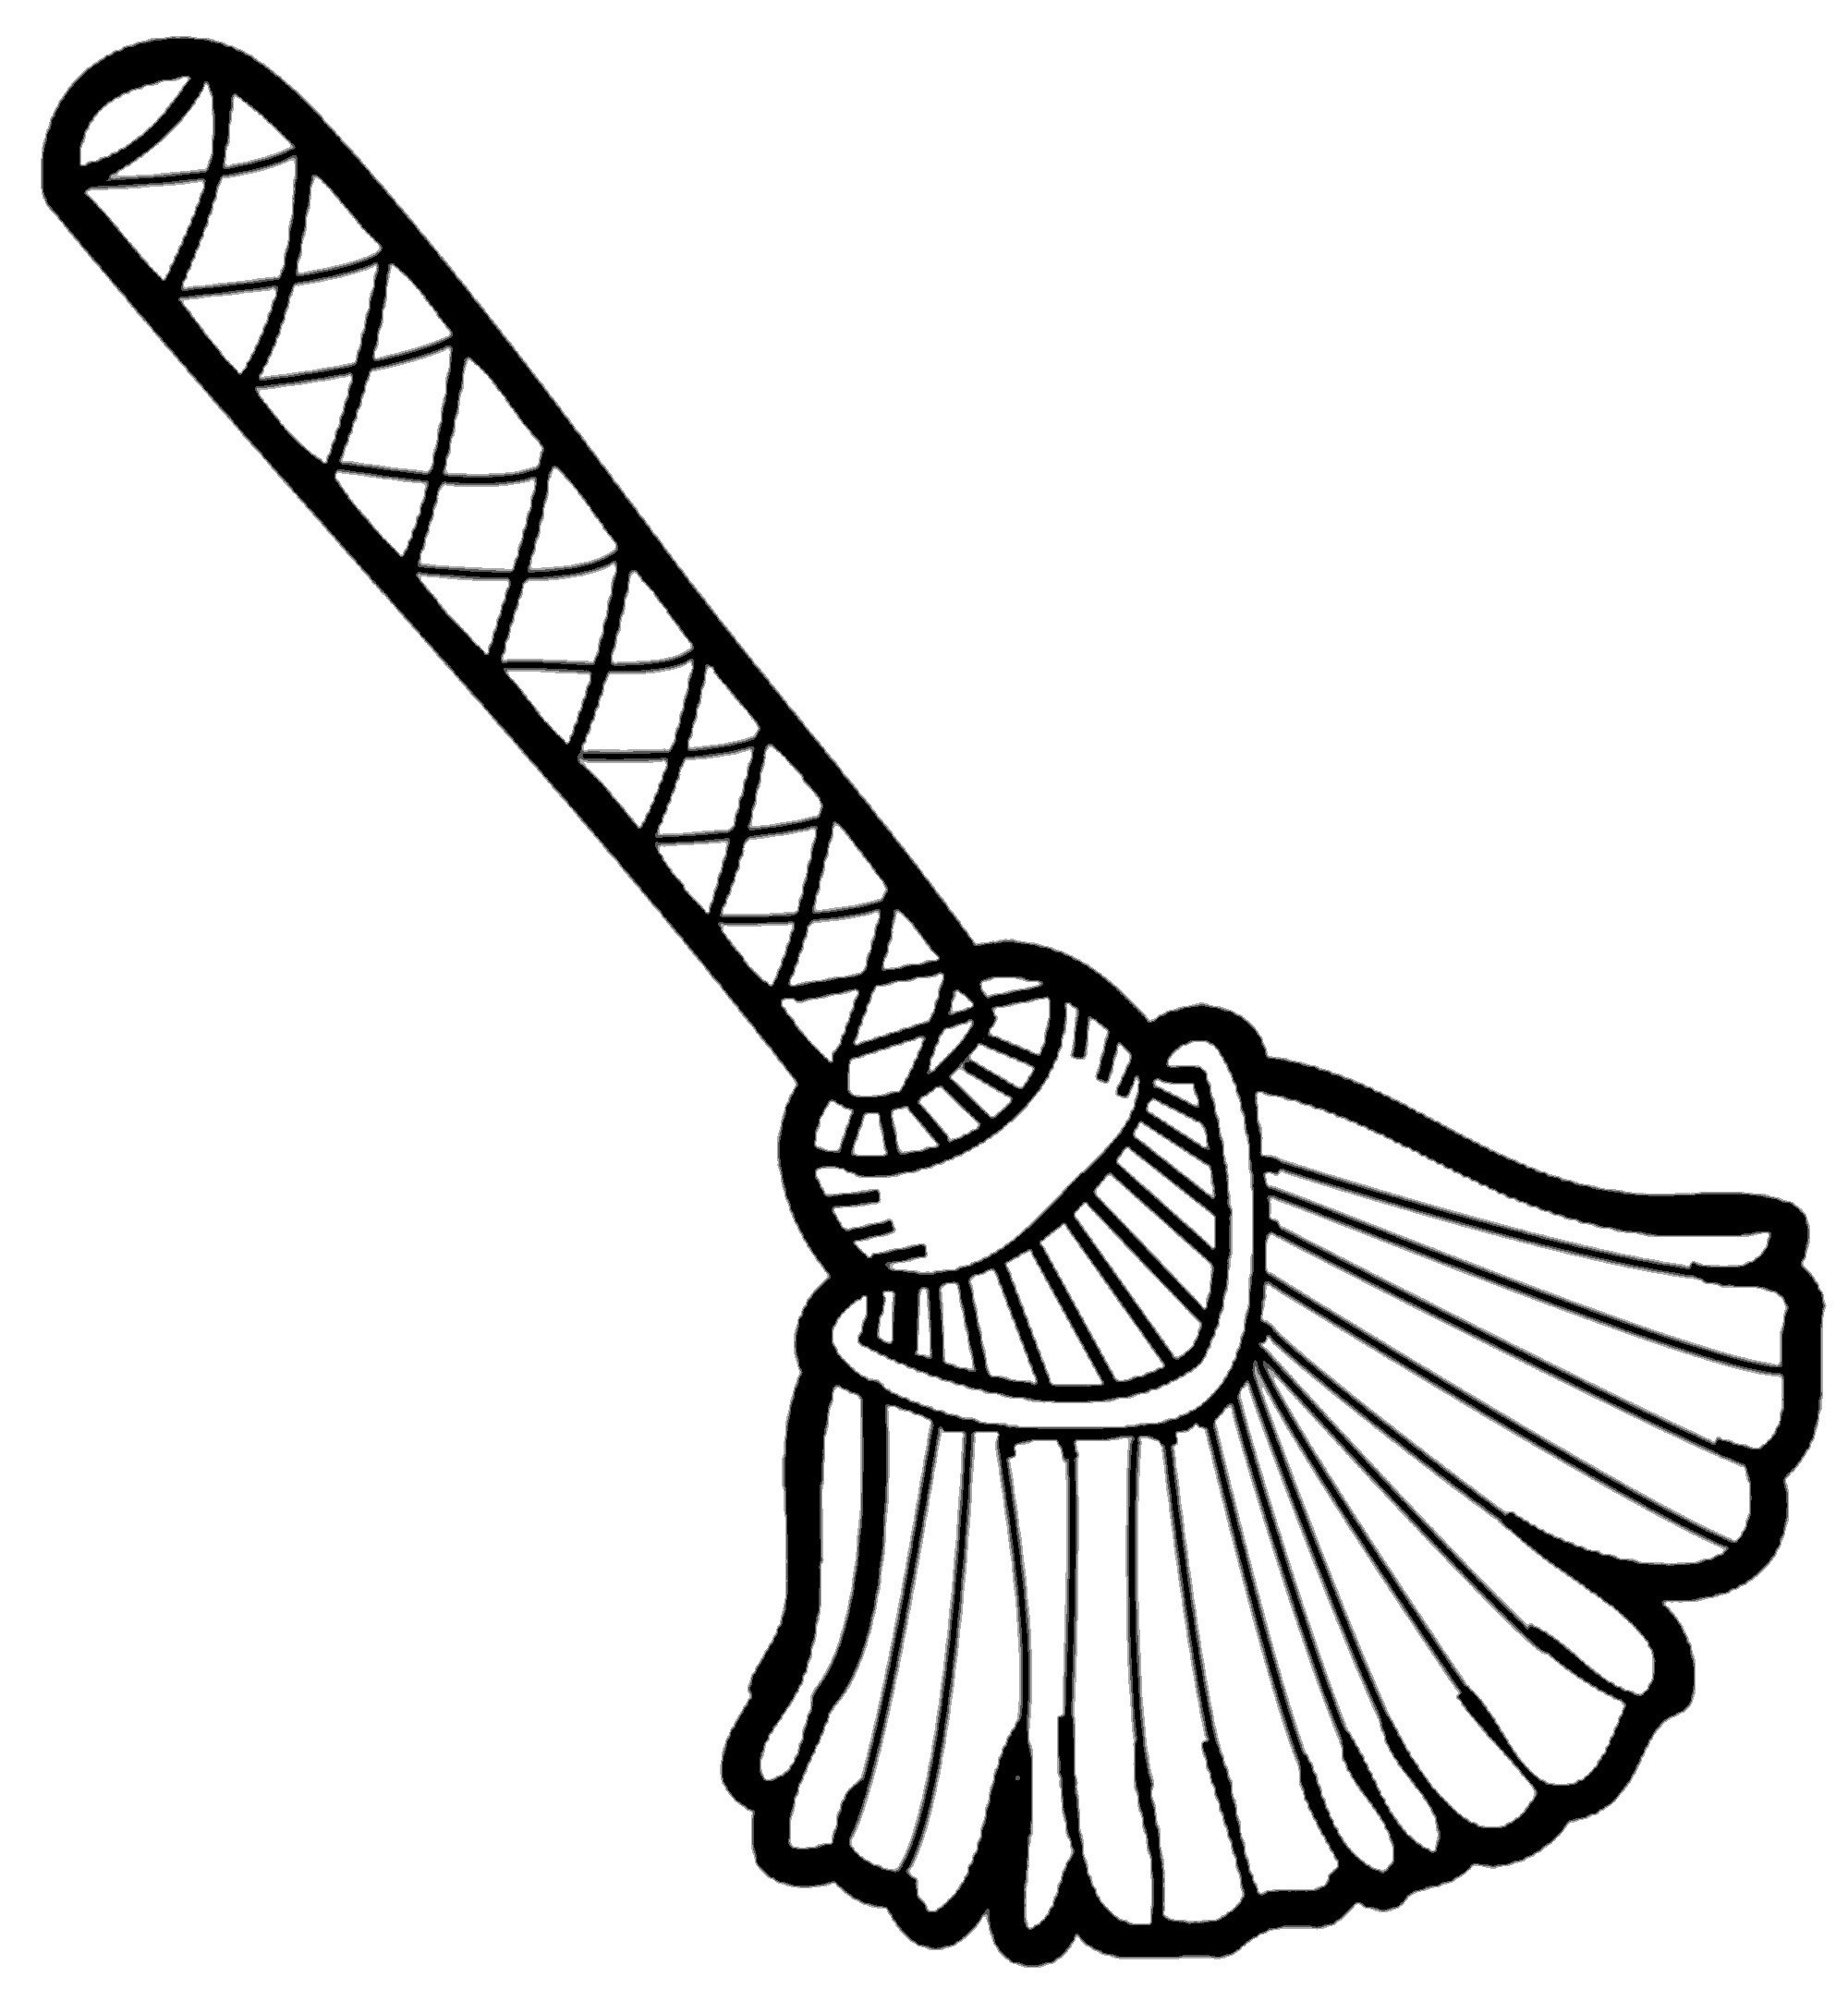 Dust Up Clipart Broom Clipart Black And White Broom 003 Jpg